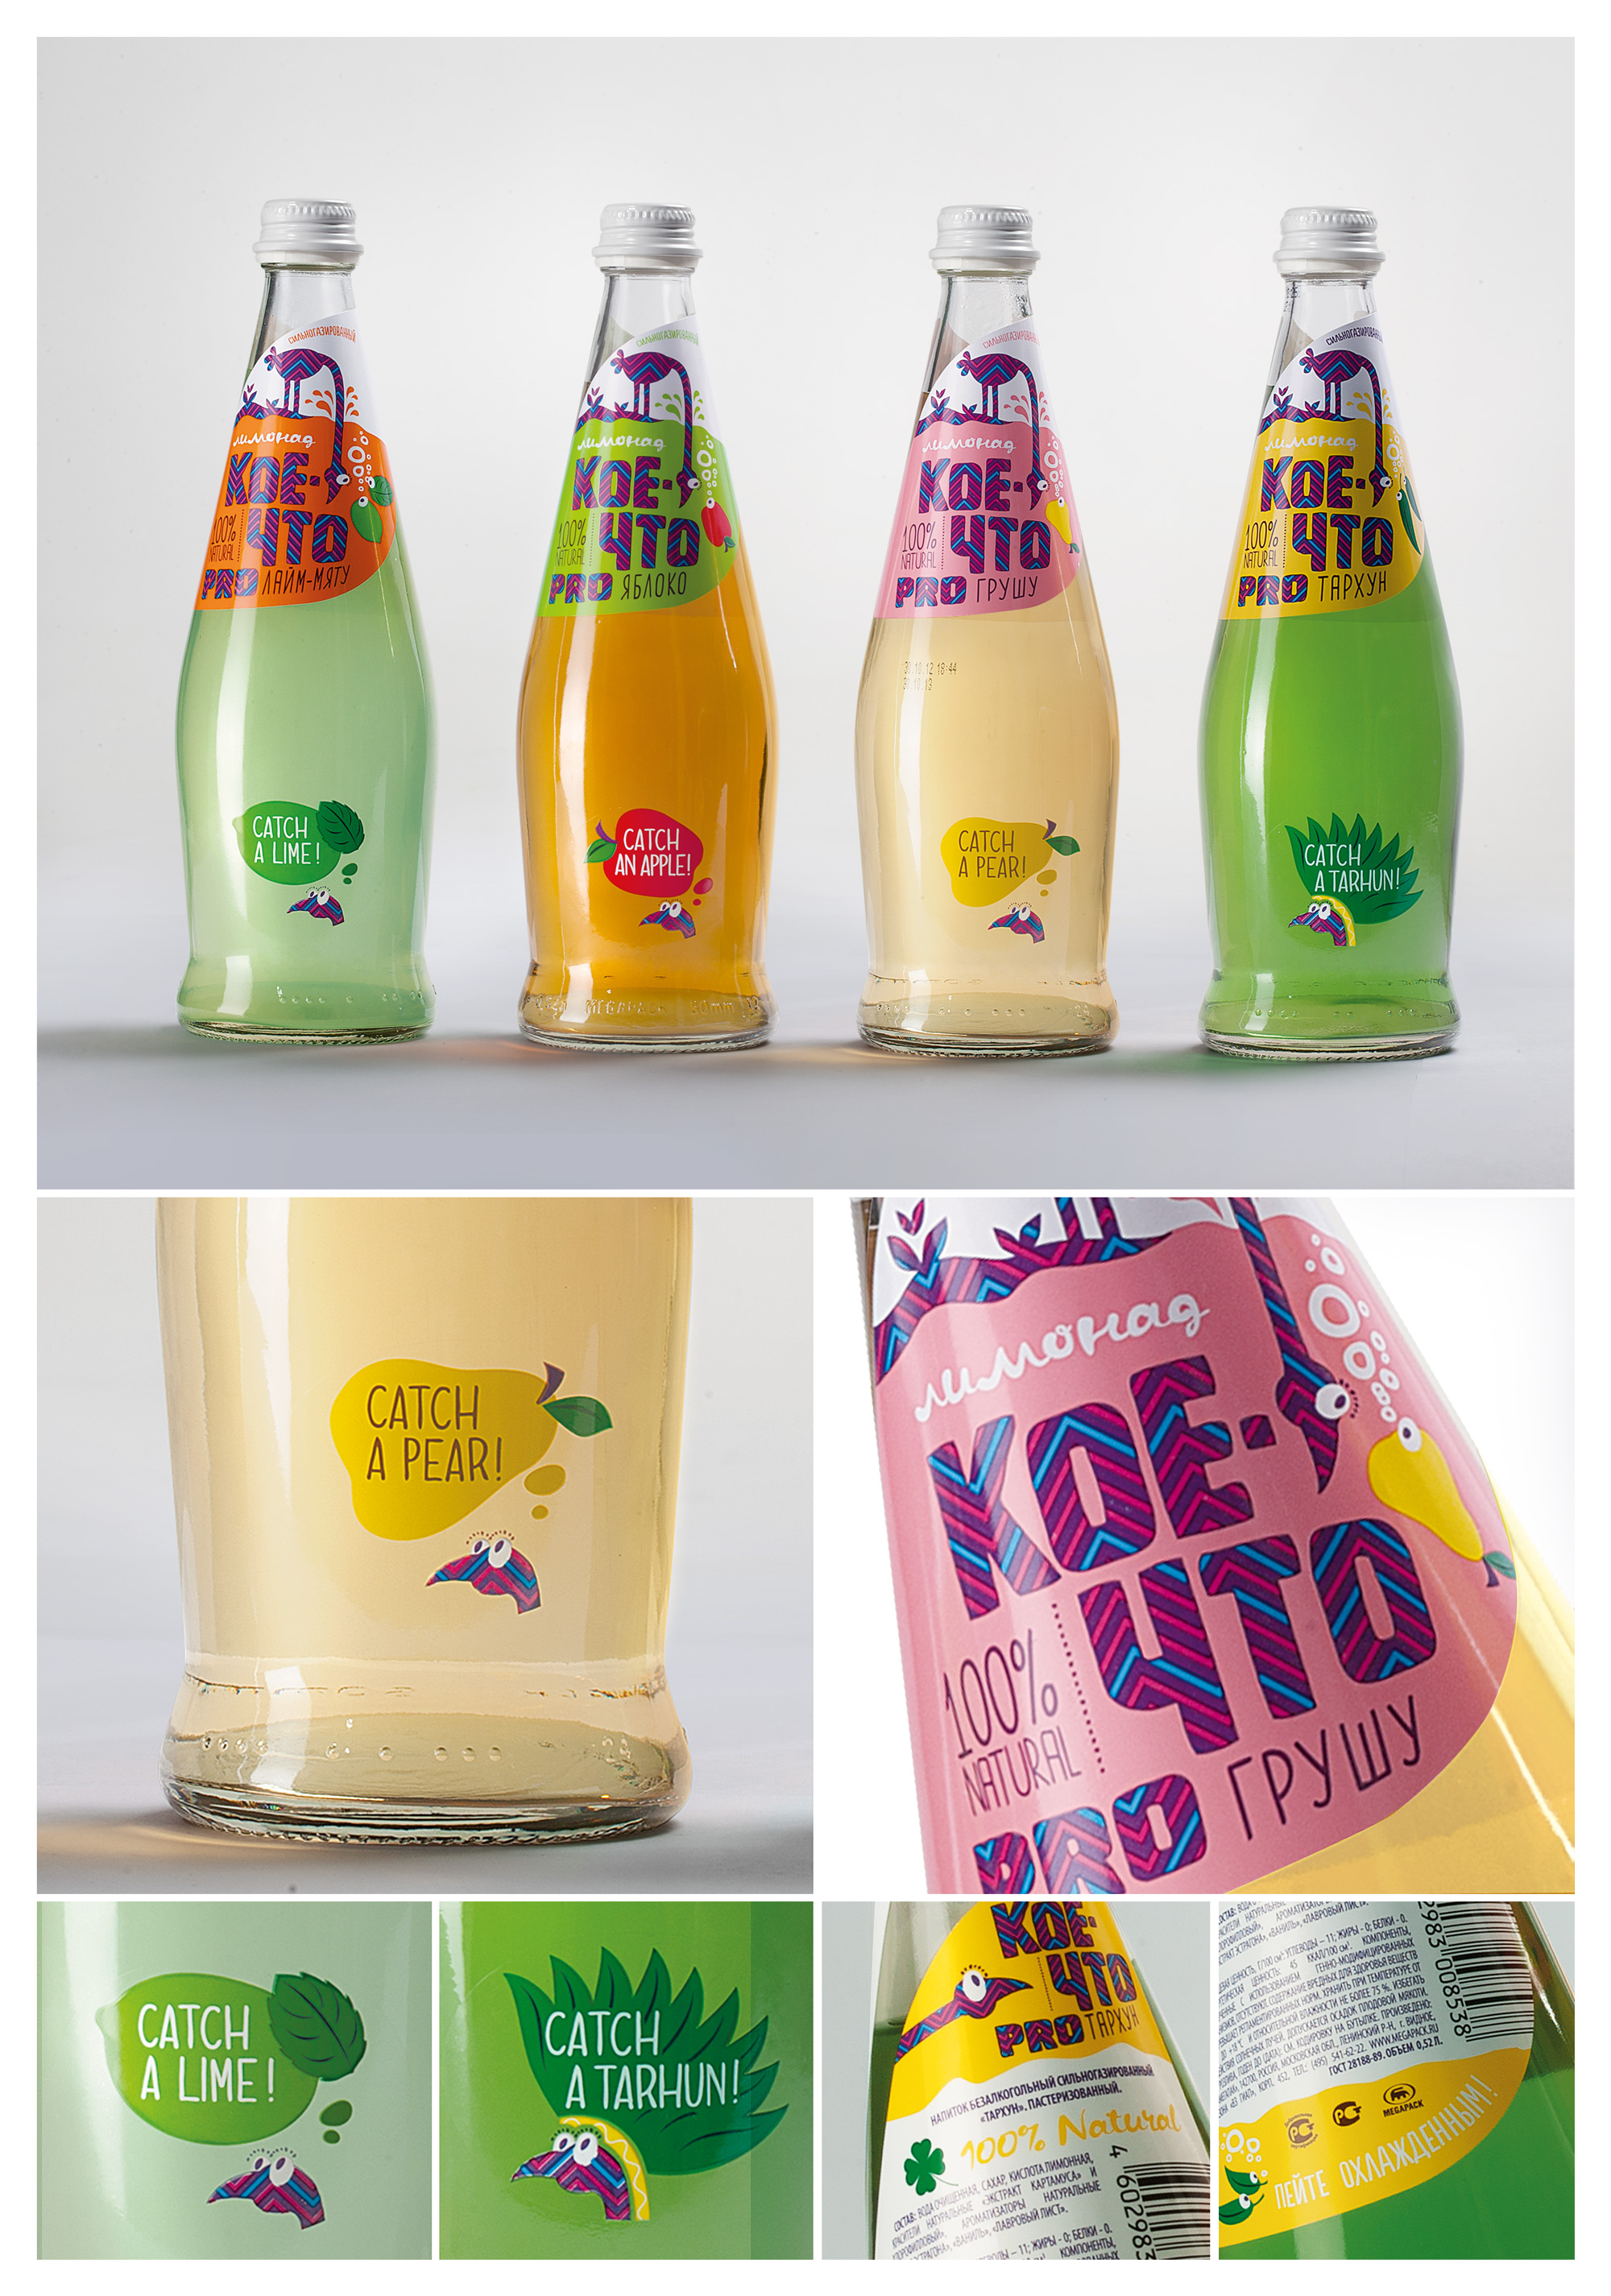 Photo: New brand of non-alcoholic beverages, Koe Chto, designed by Depot WPF